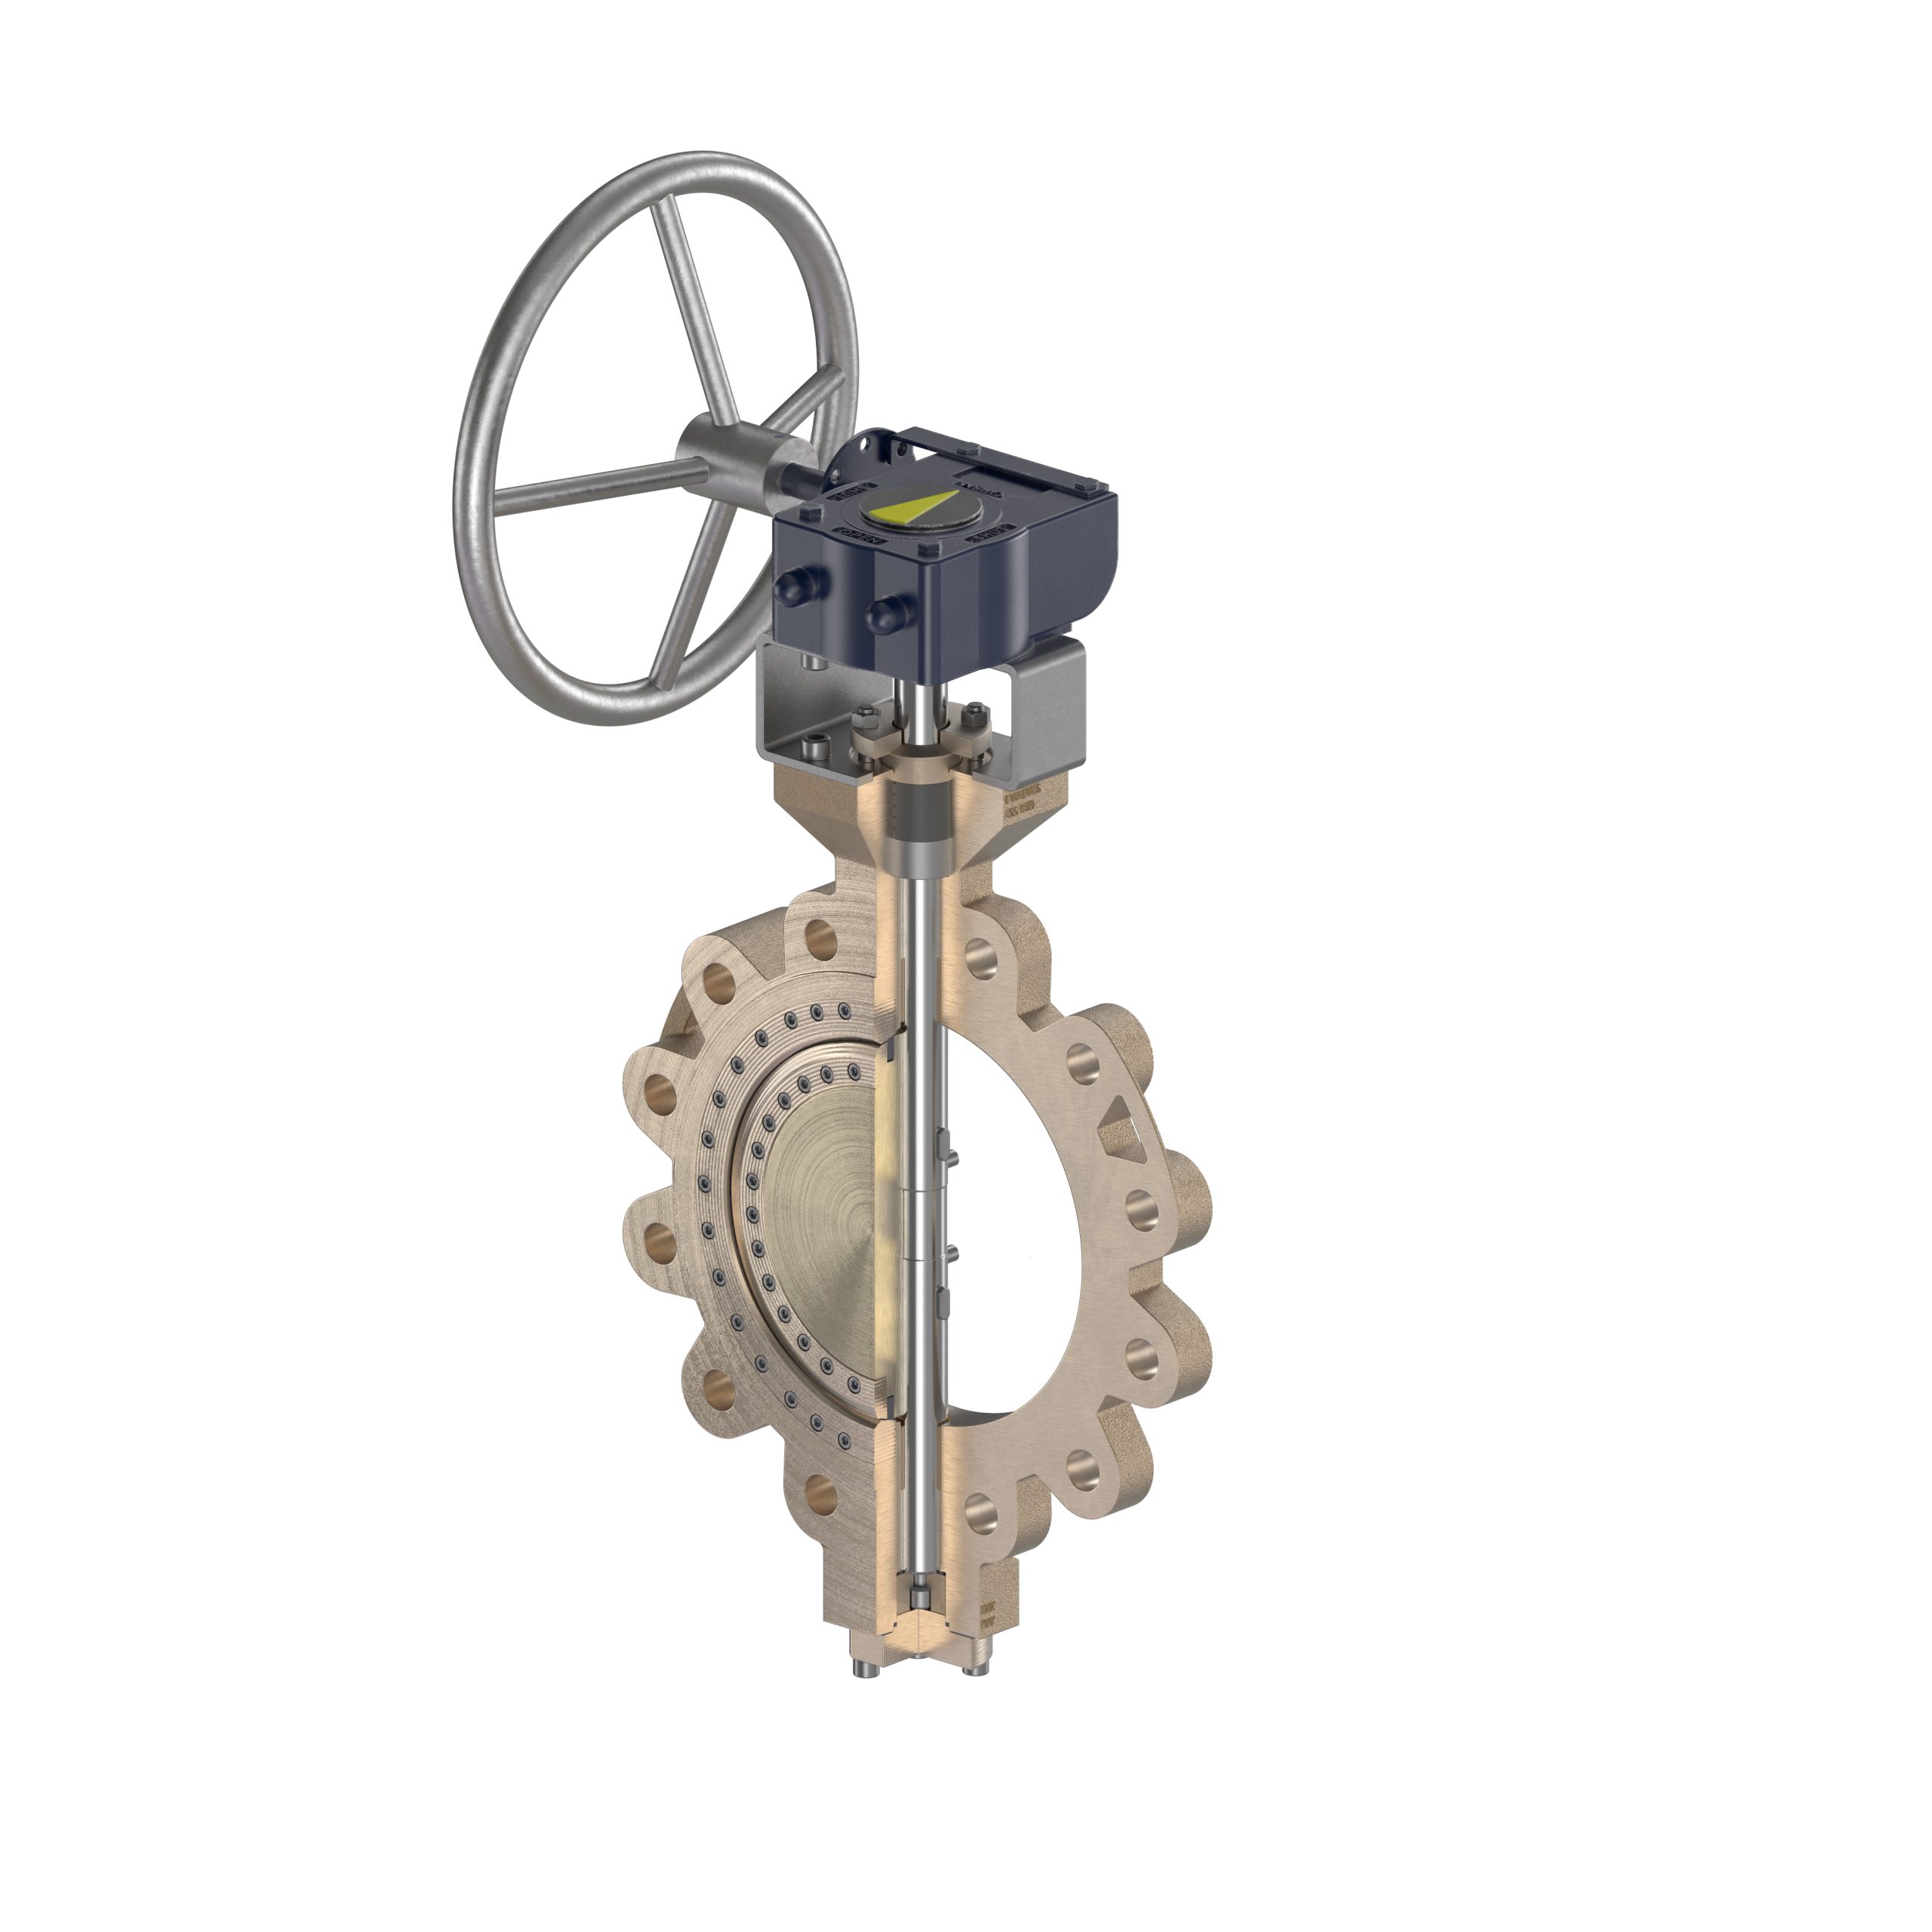 Shipham Valves BU05 Triple-Offset Butterfly Valve with wafer lugged body - Cutaway